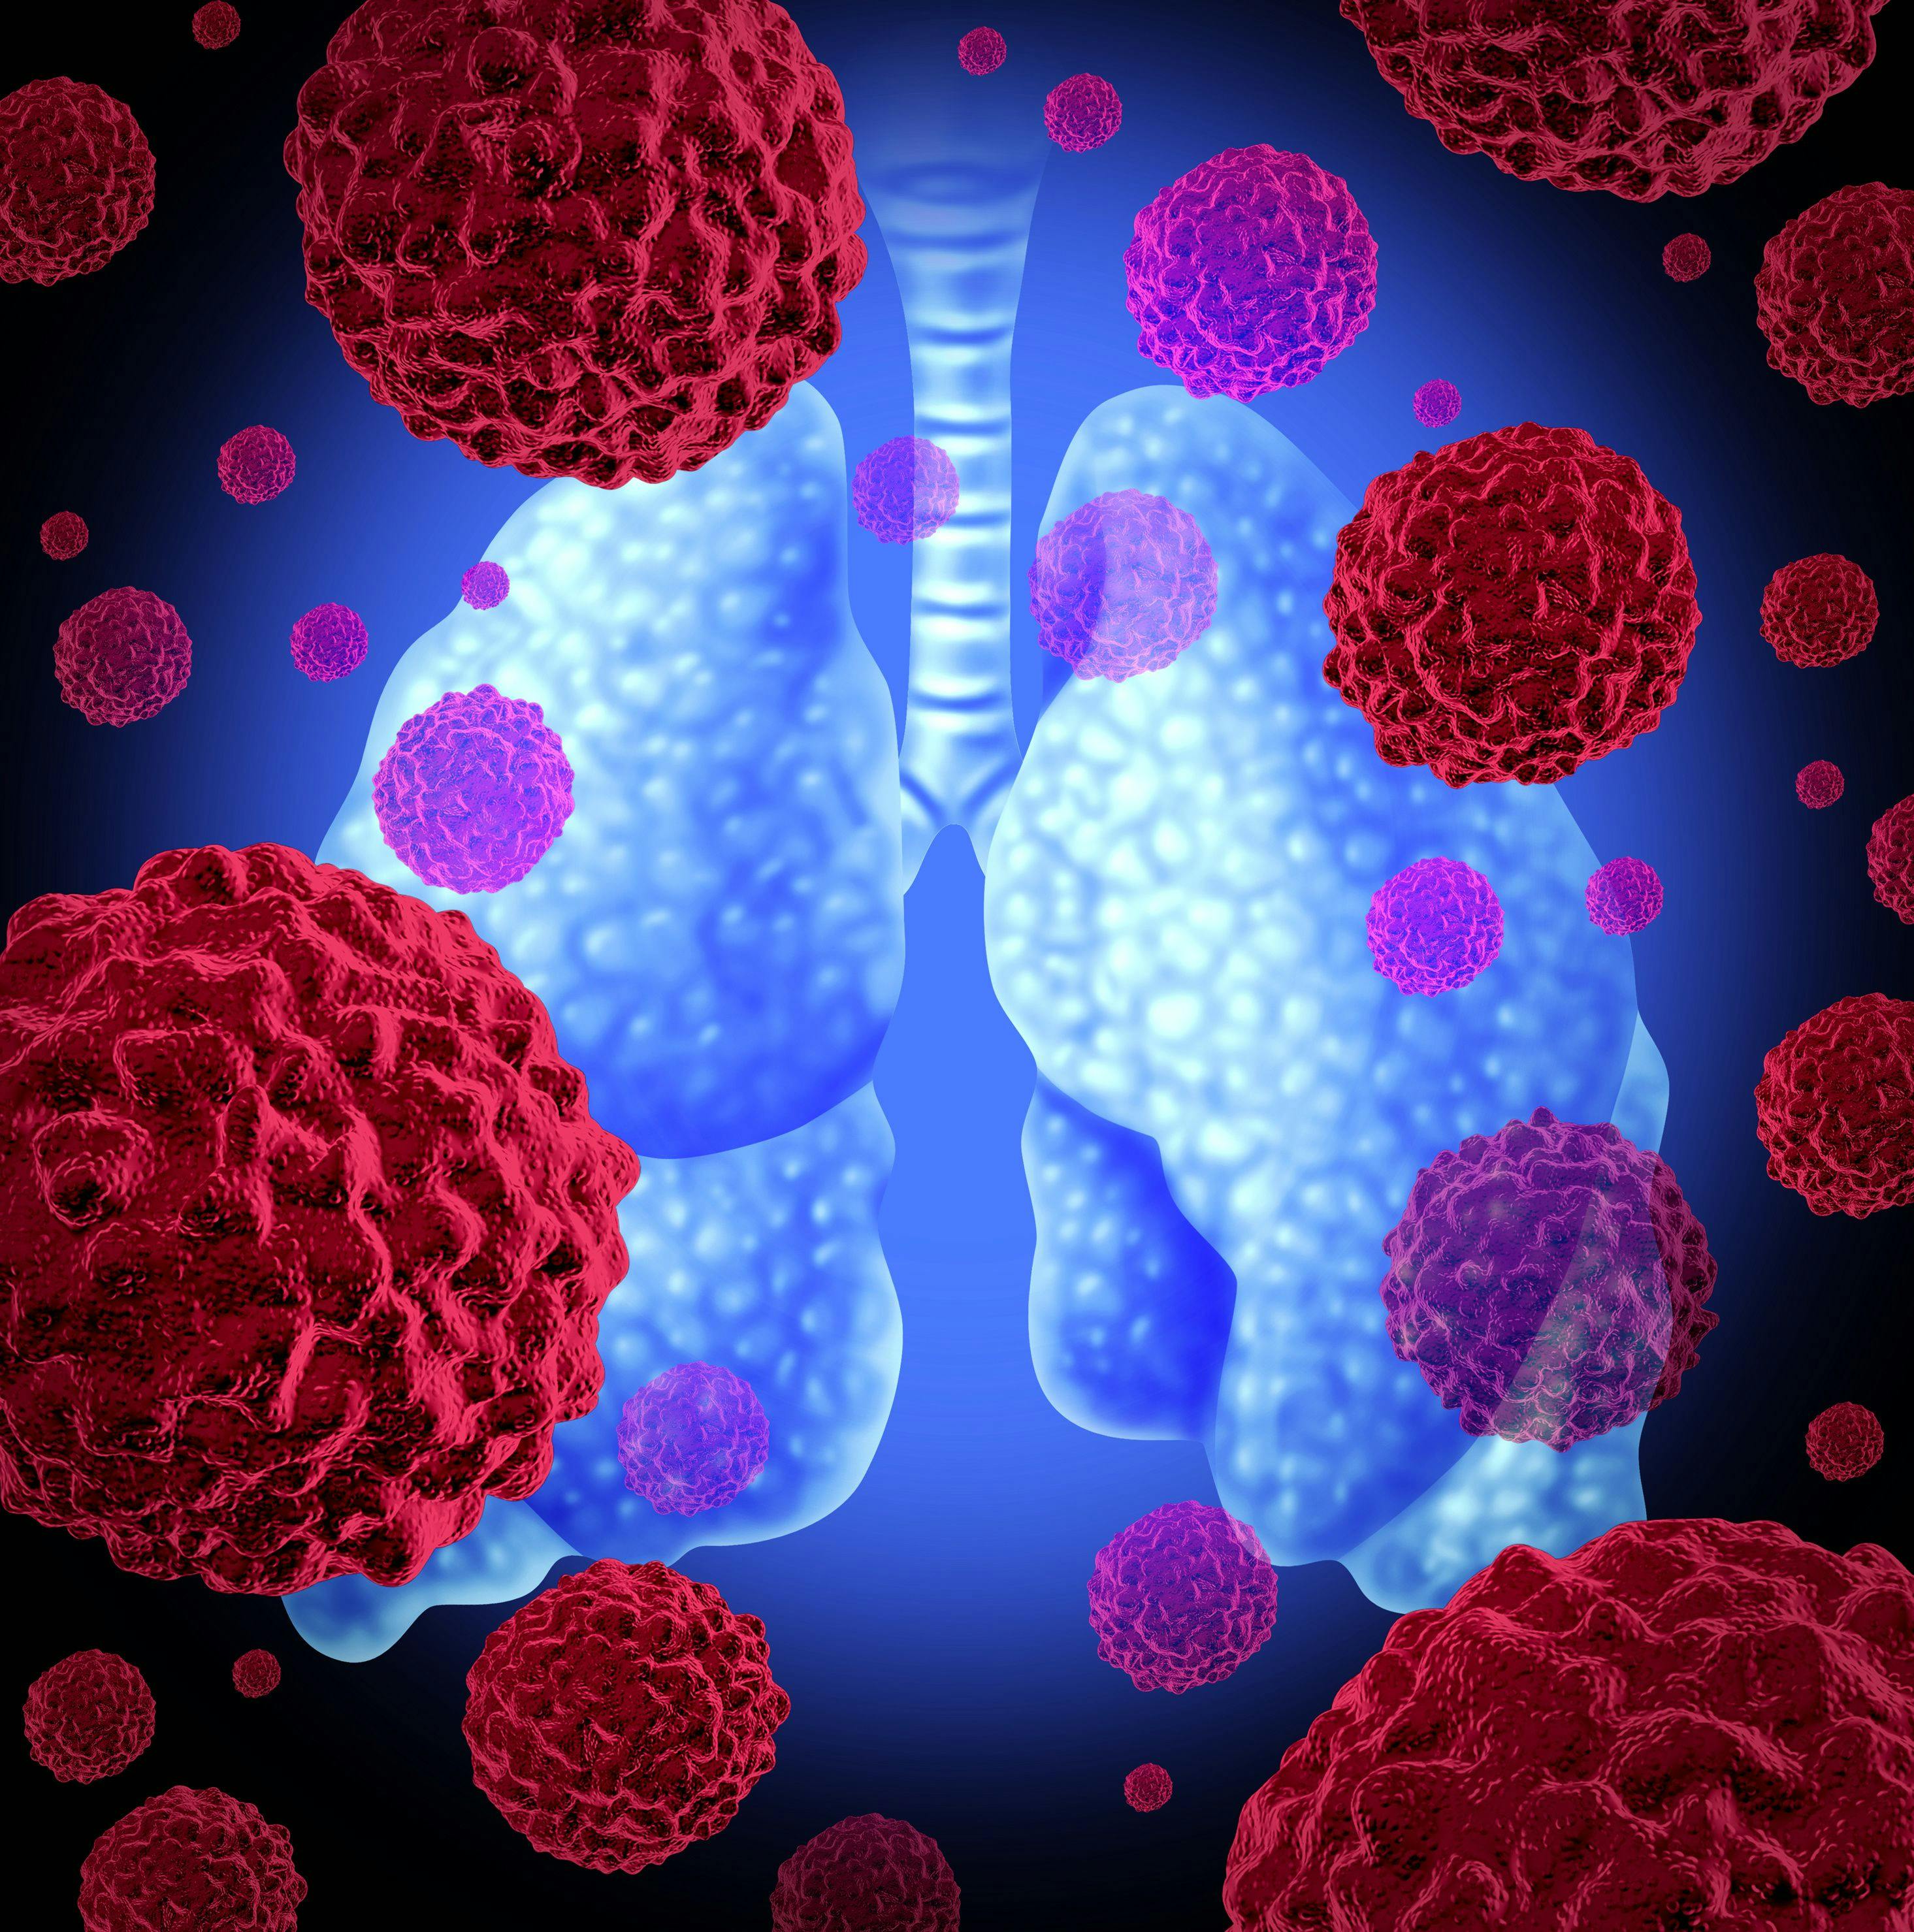 CheckMate 9LA Update Shows Consistent Benefit of Nivolumab/Ipilimumab Plus Chemotherapy for Advanced NSCLC